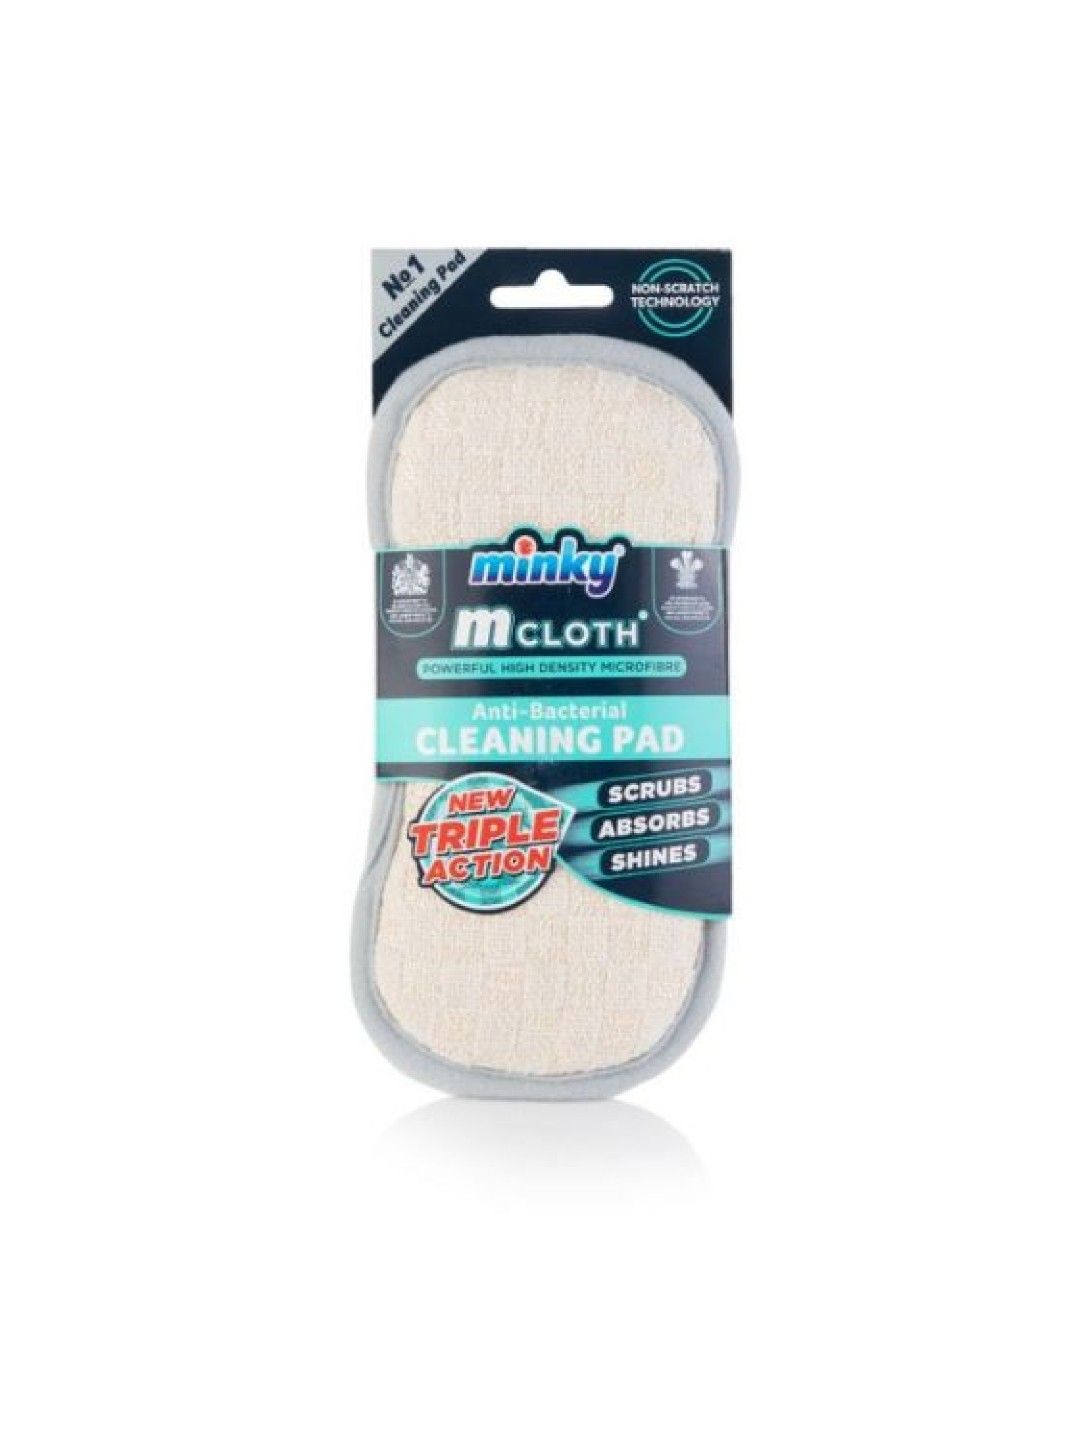 Minky Triple Action Anti-Bacterial Cleaning Pad